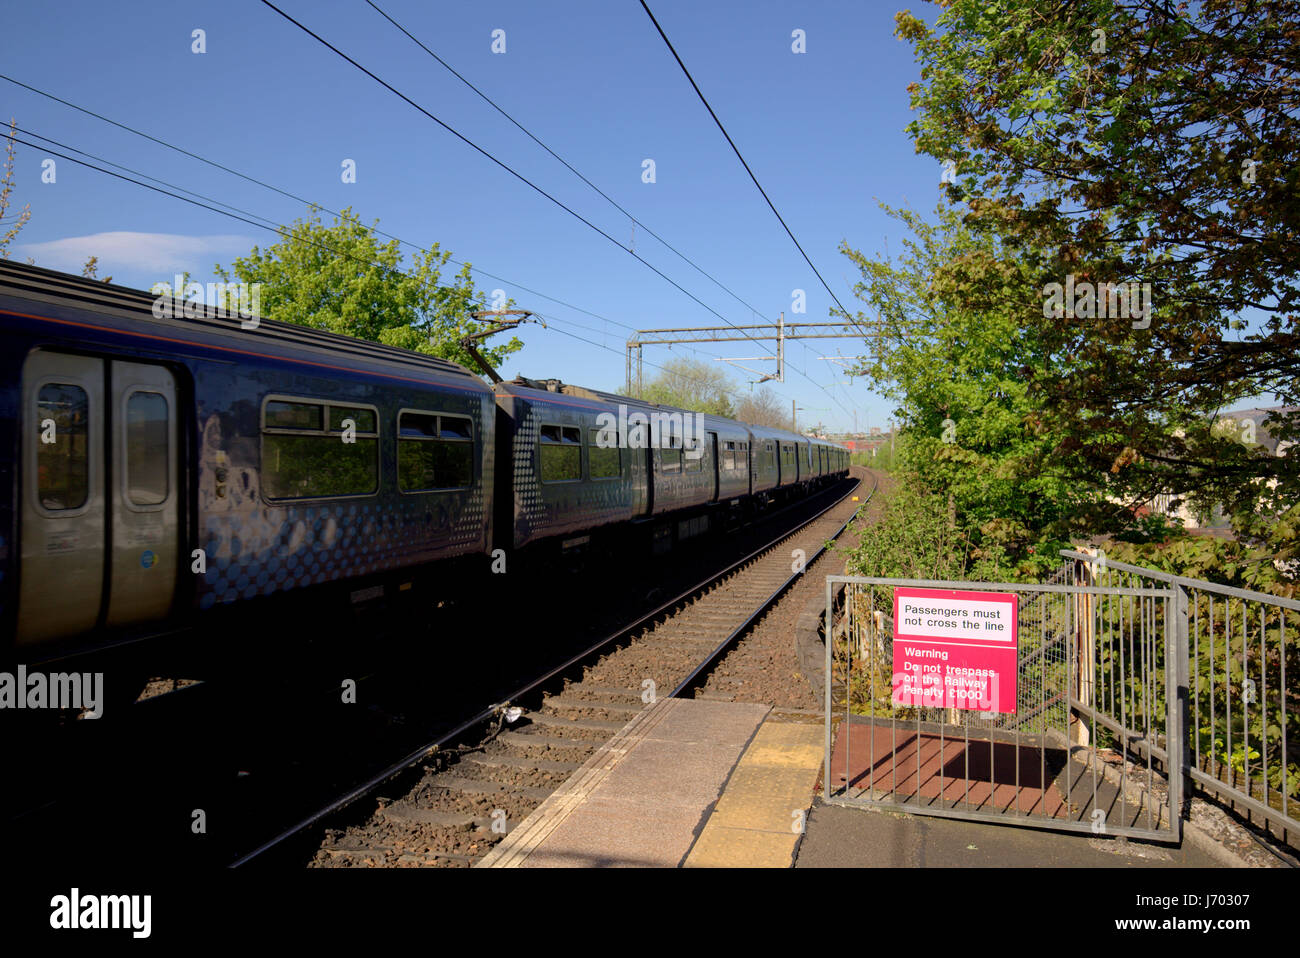 Scotrail train in station no trespassing on the railway sign Drumchapel Stock Photo